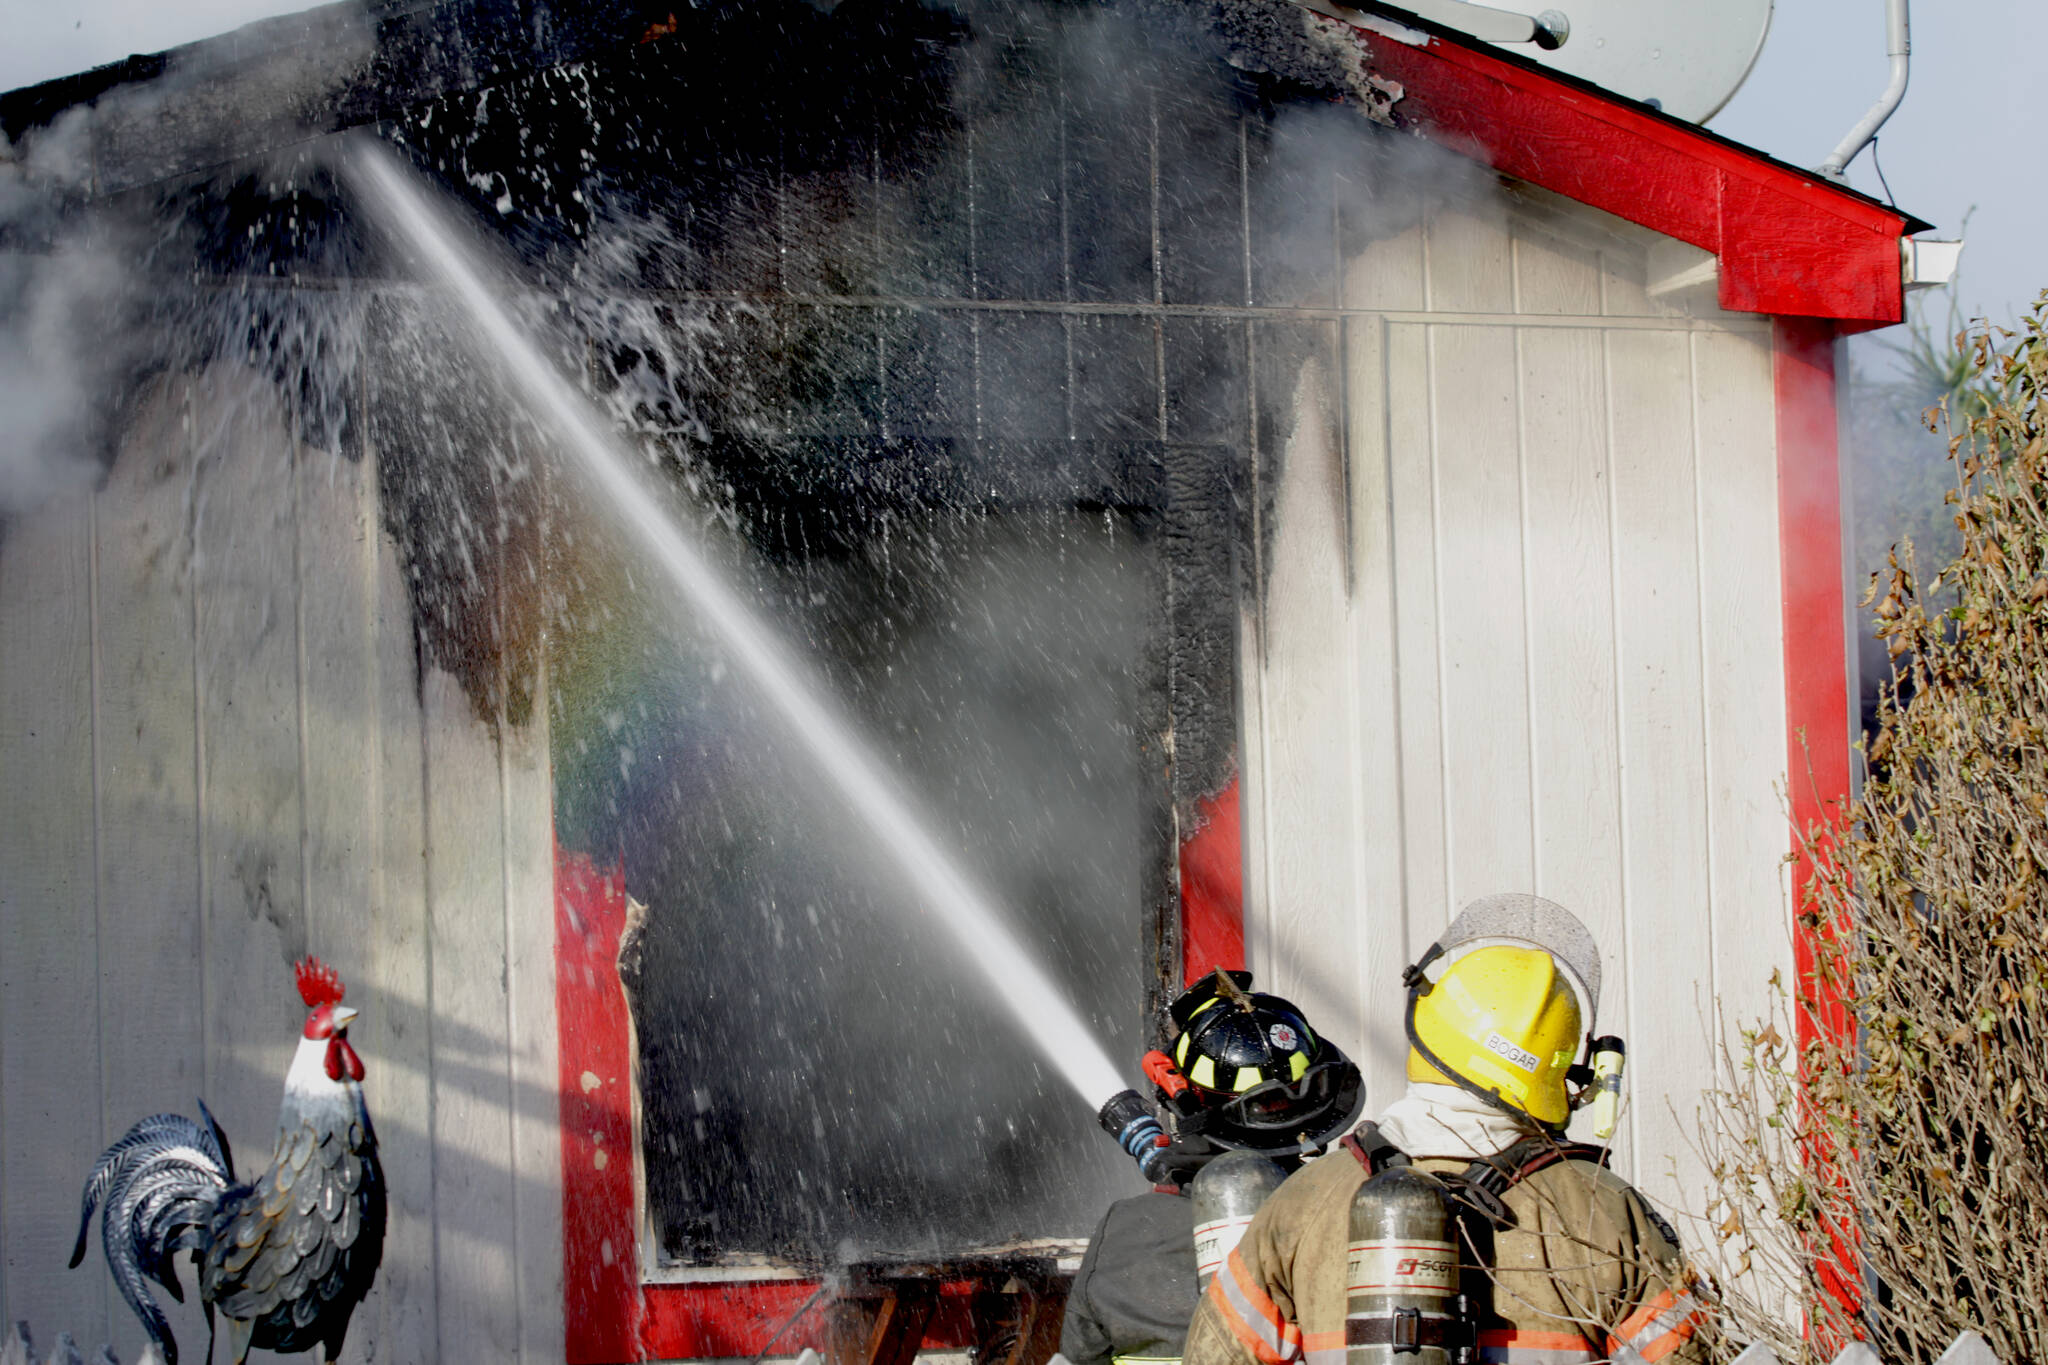 Michael S. Lockett / The Daily World 
Firefighters spray down a structure fire in Elma on Nov. 15.